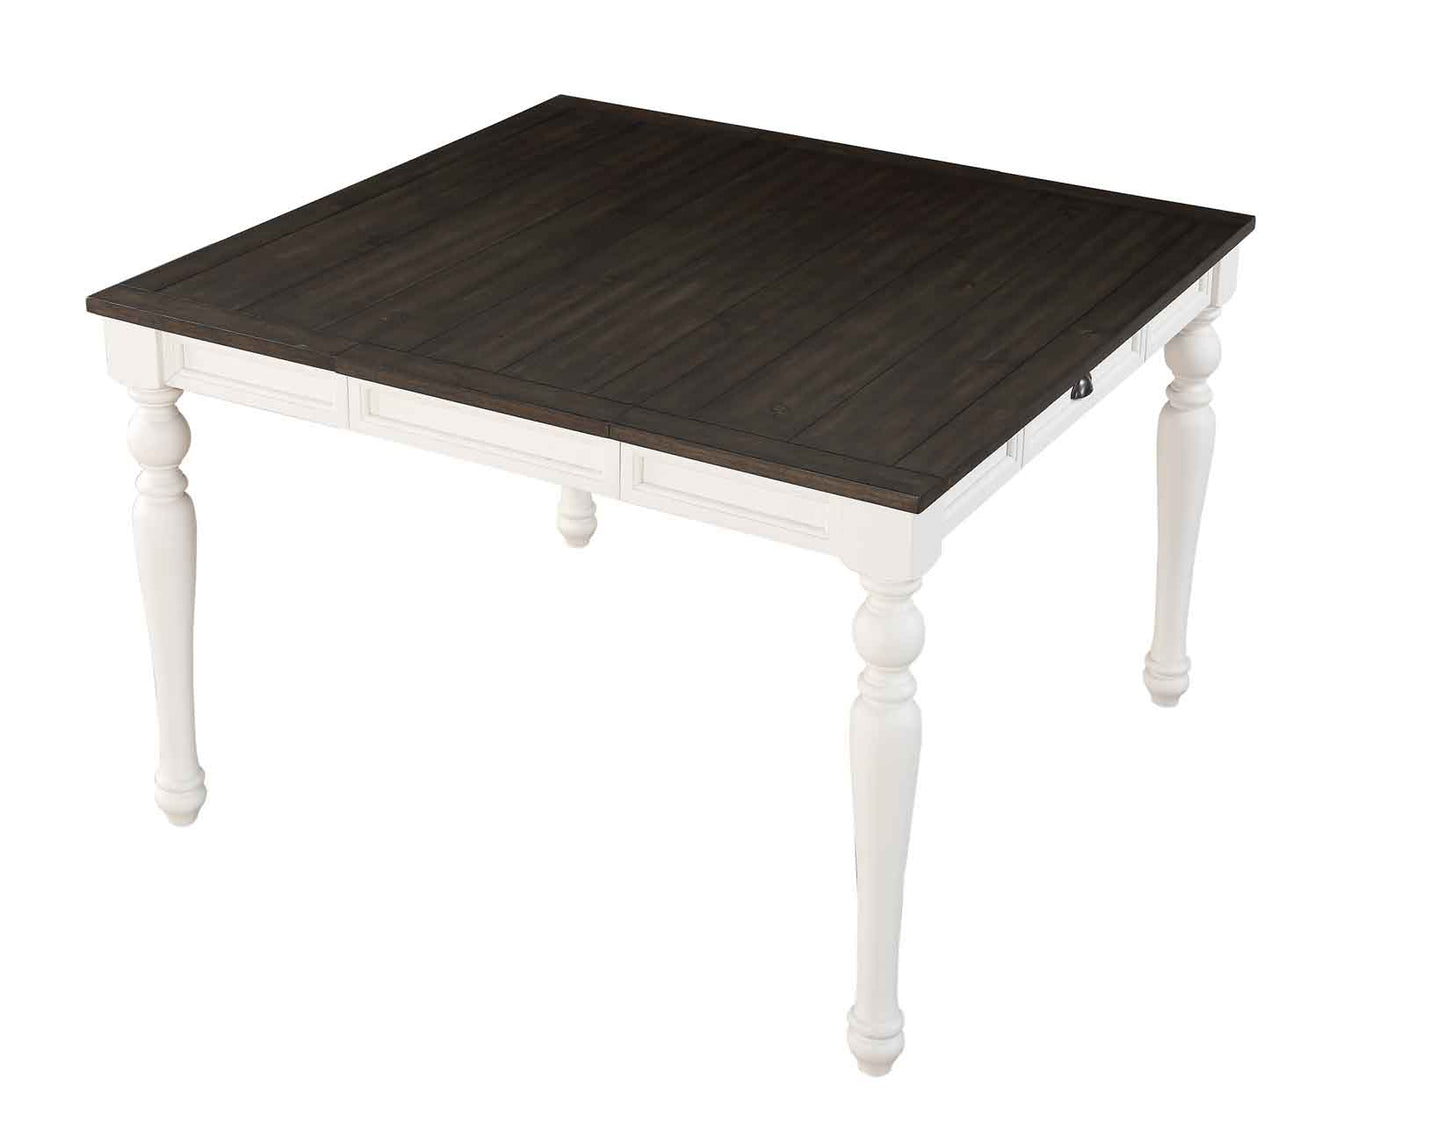 Joanna Two-Tone Counter Height Table by Steve Silver